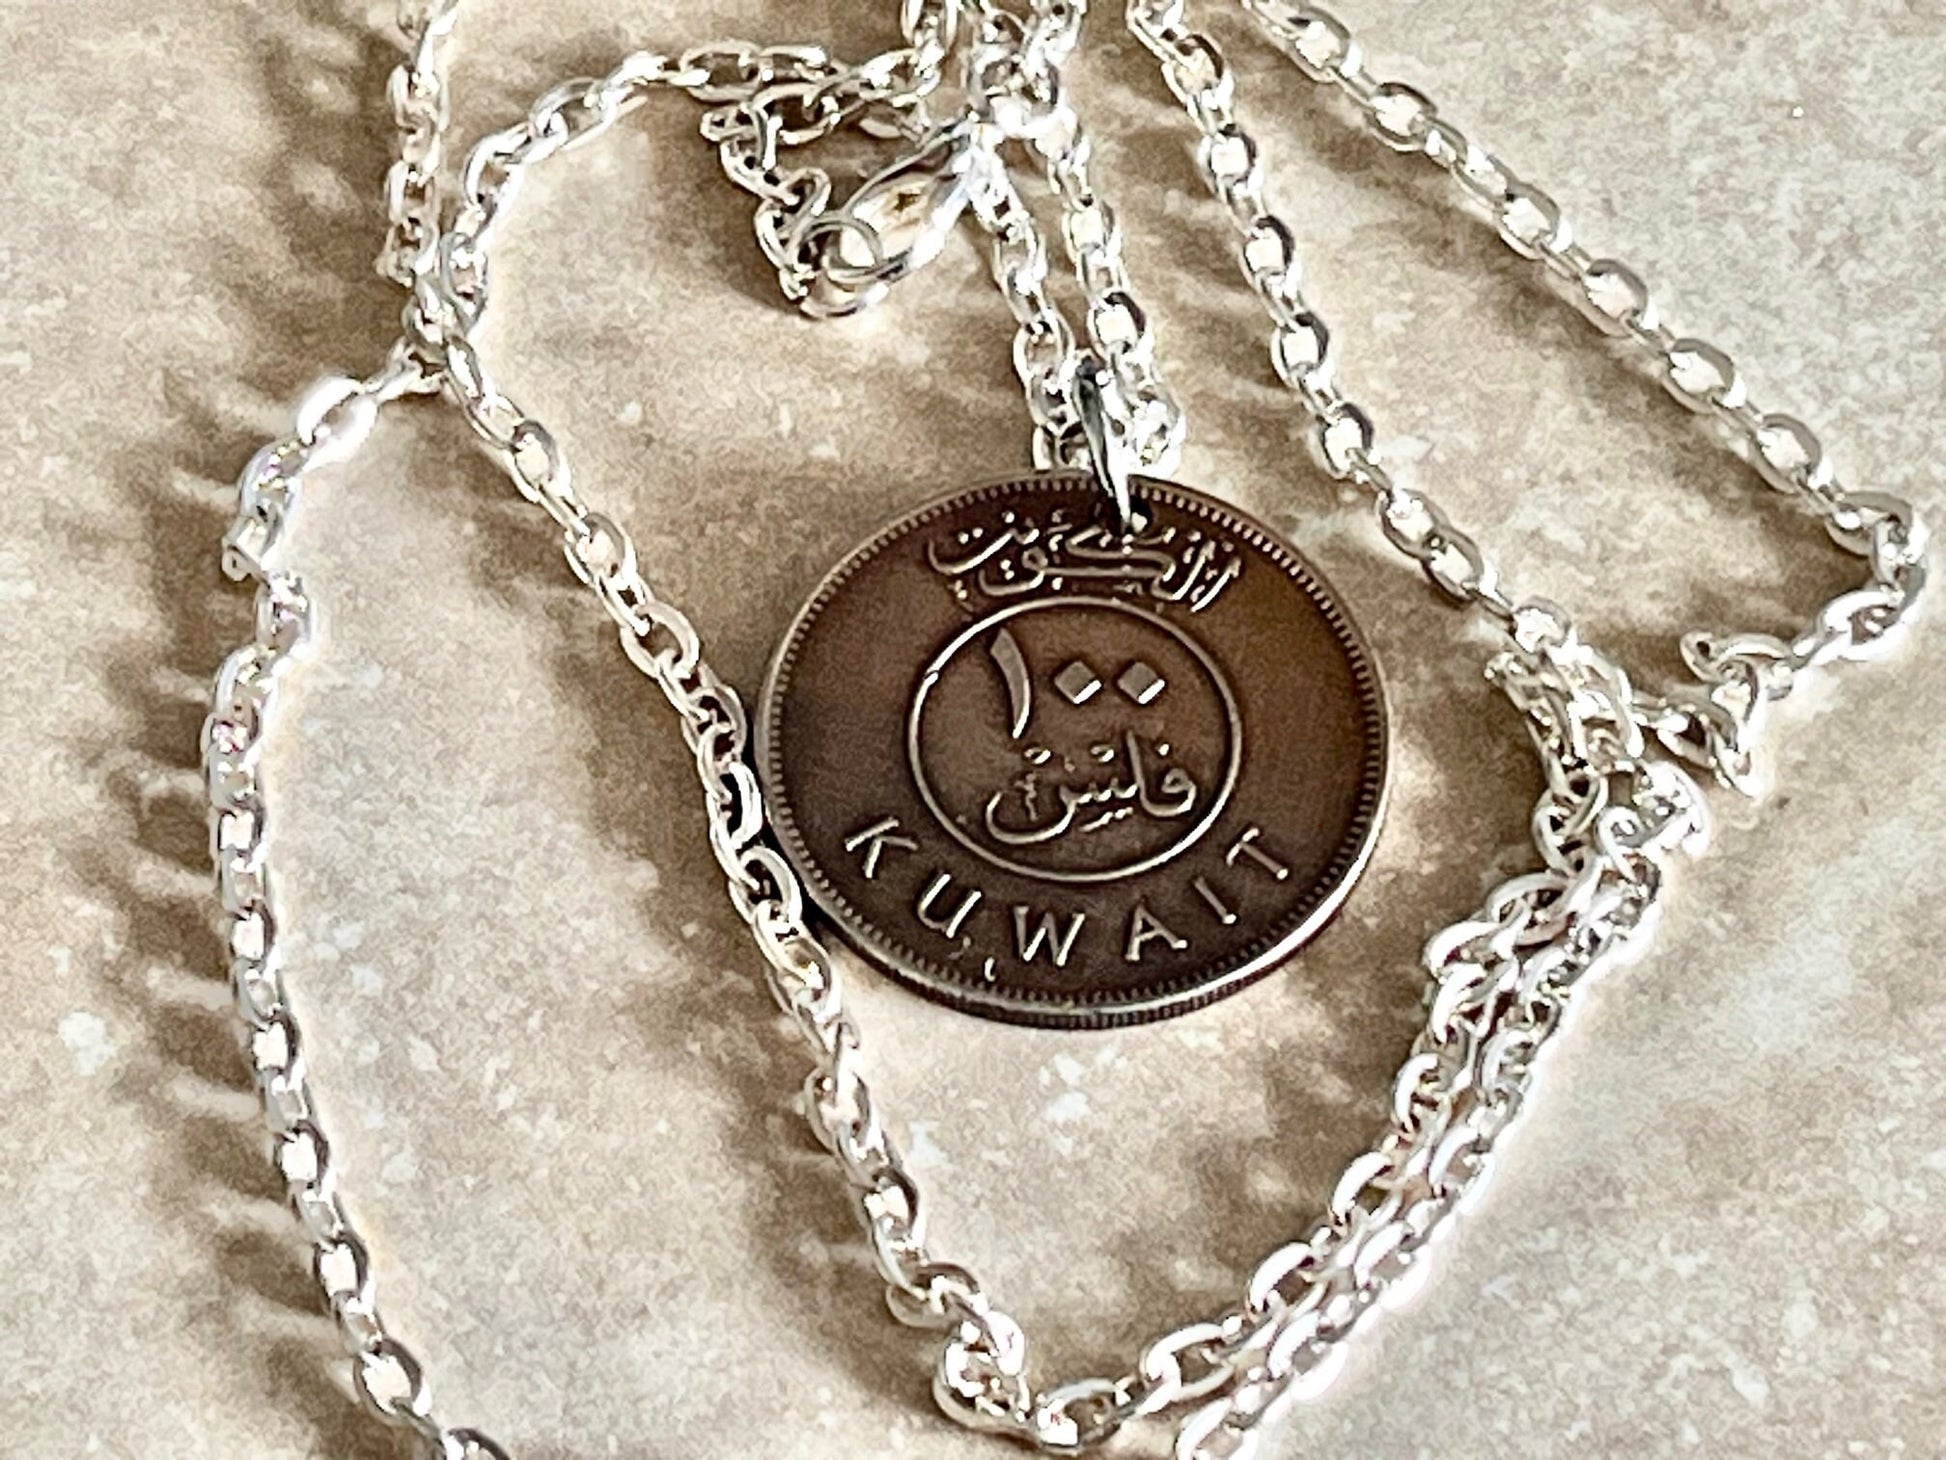 Kuwait Coin Necklace Pendant Kuwaiti 1 Fils Vintage Personal Vintage Handmade Jewelry Gift Friend Charm For Him Her World Coin Collector